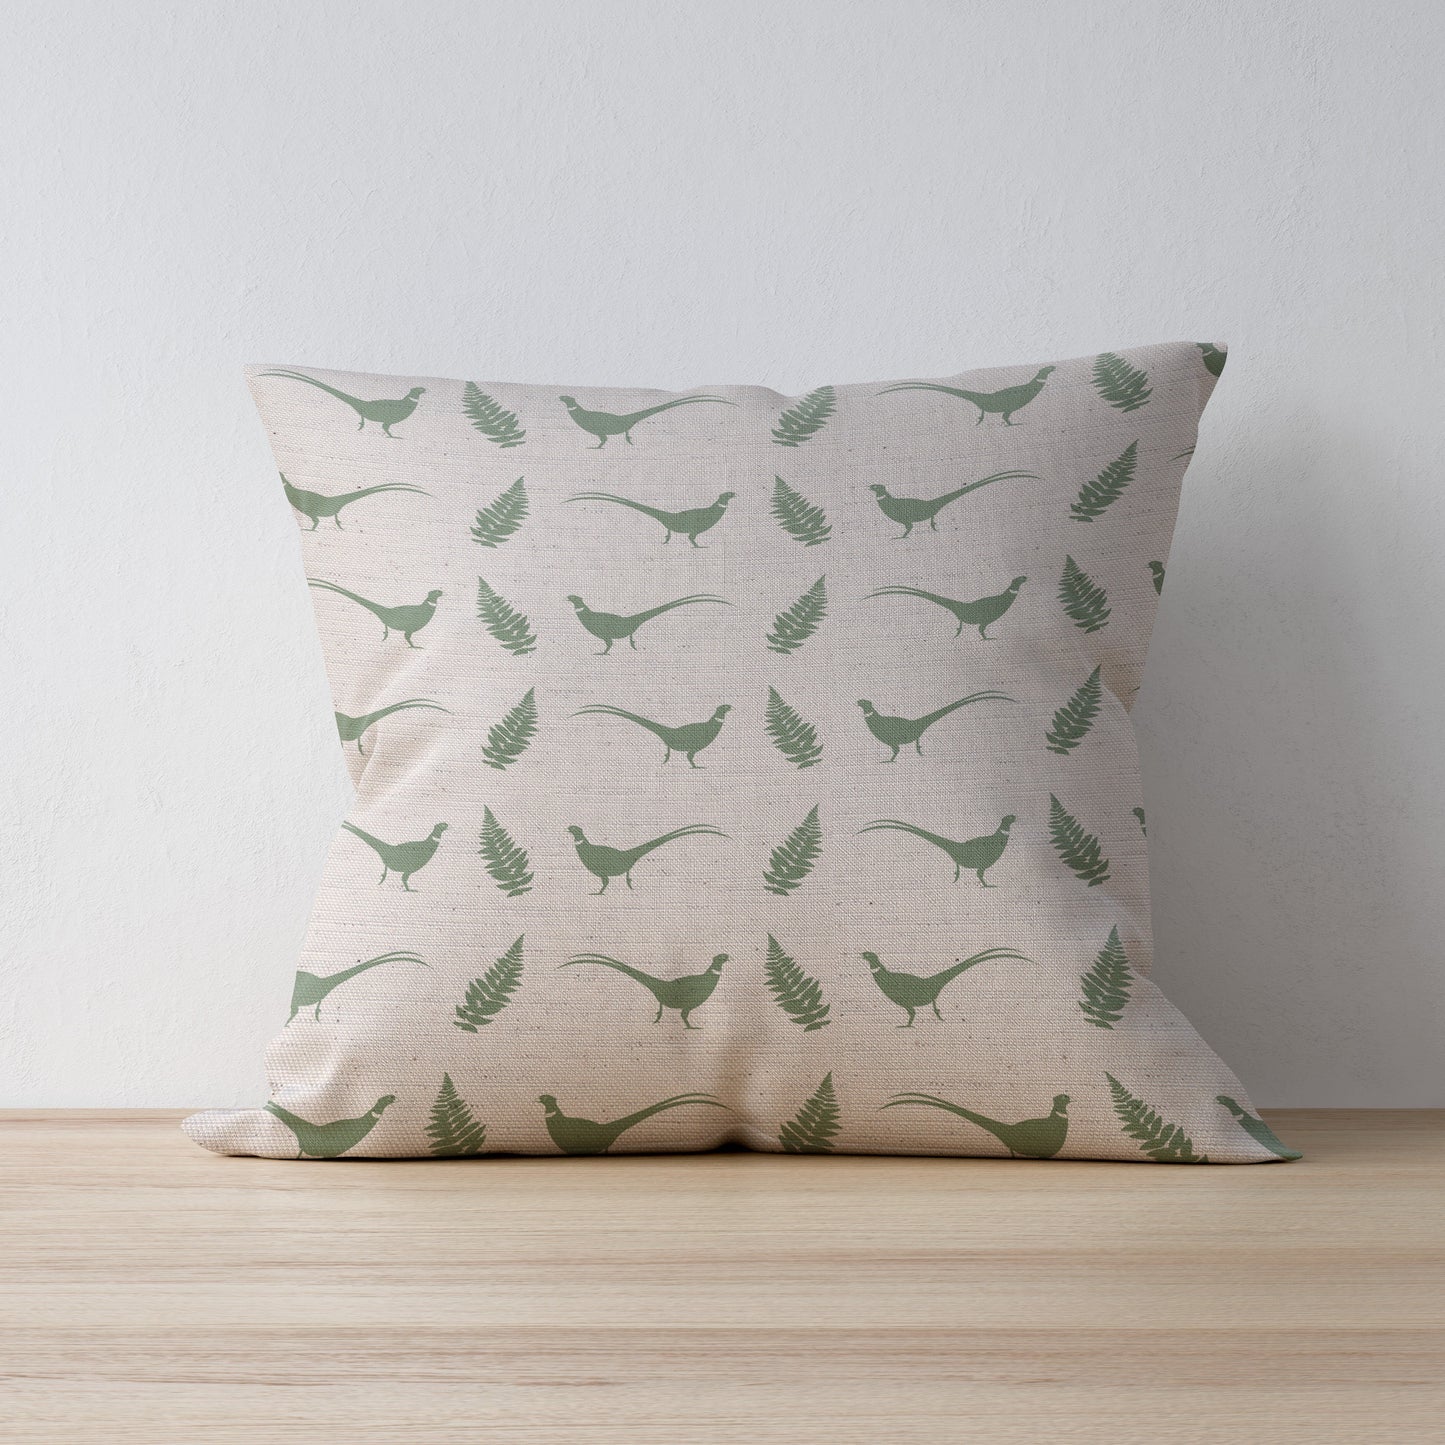 Hovingham Green Cushion available in Duck Feather or Hollowfibre featuring Pheasants and Fern Leaves - Designed and Made by F&B